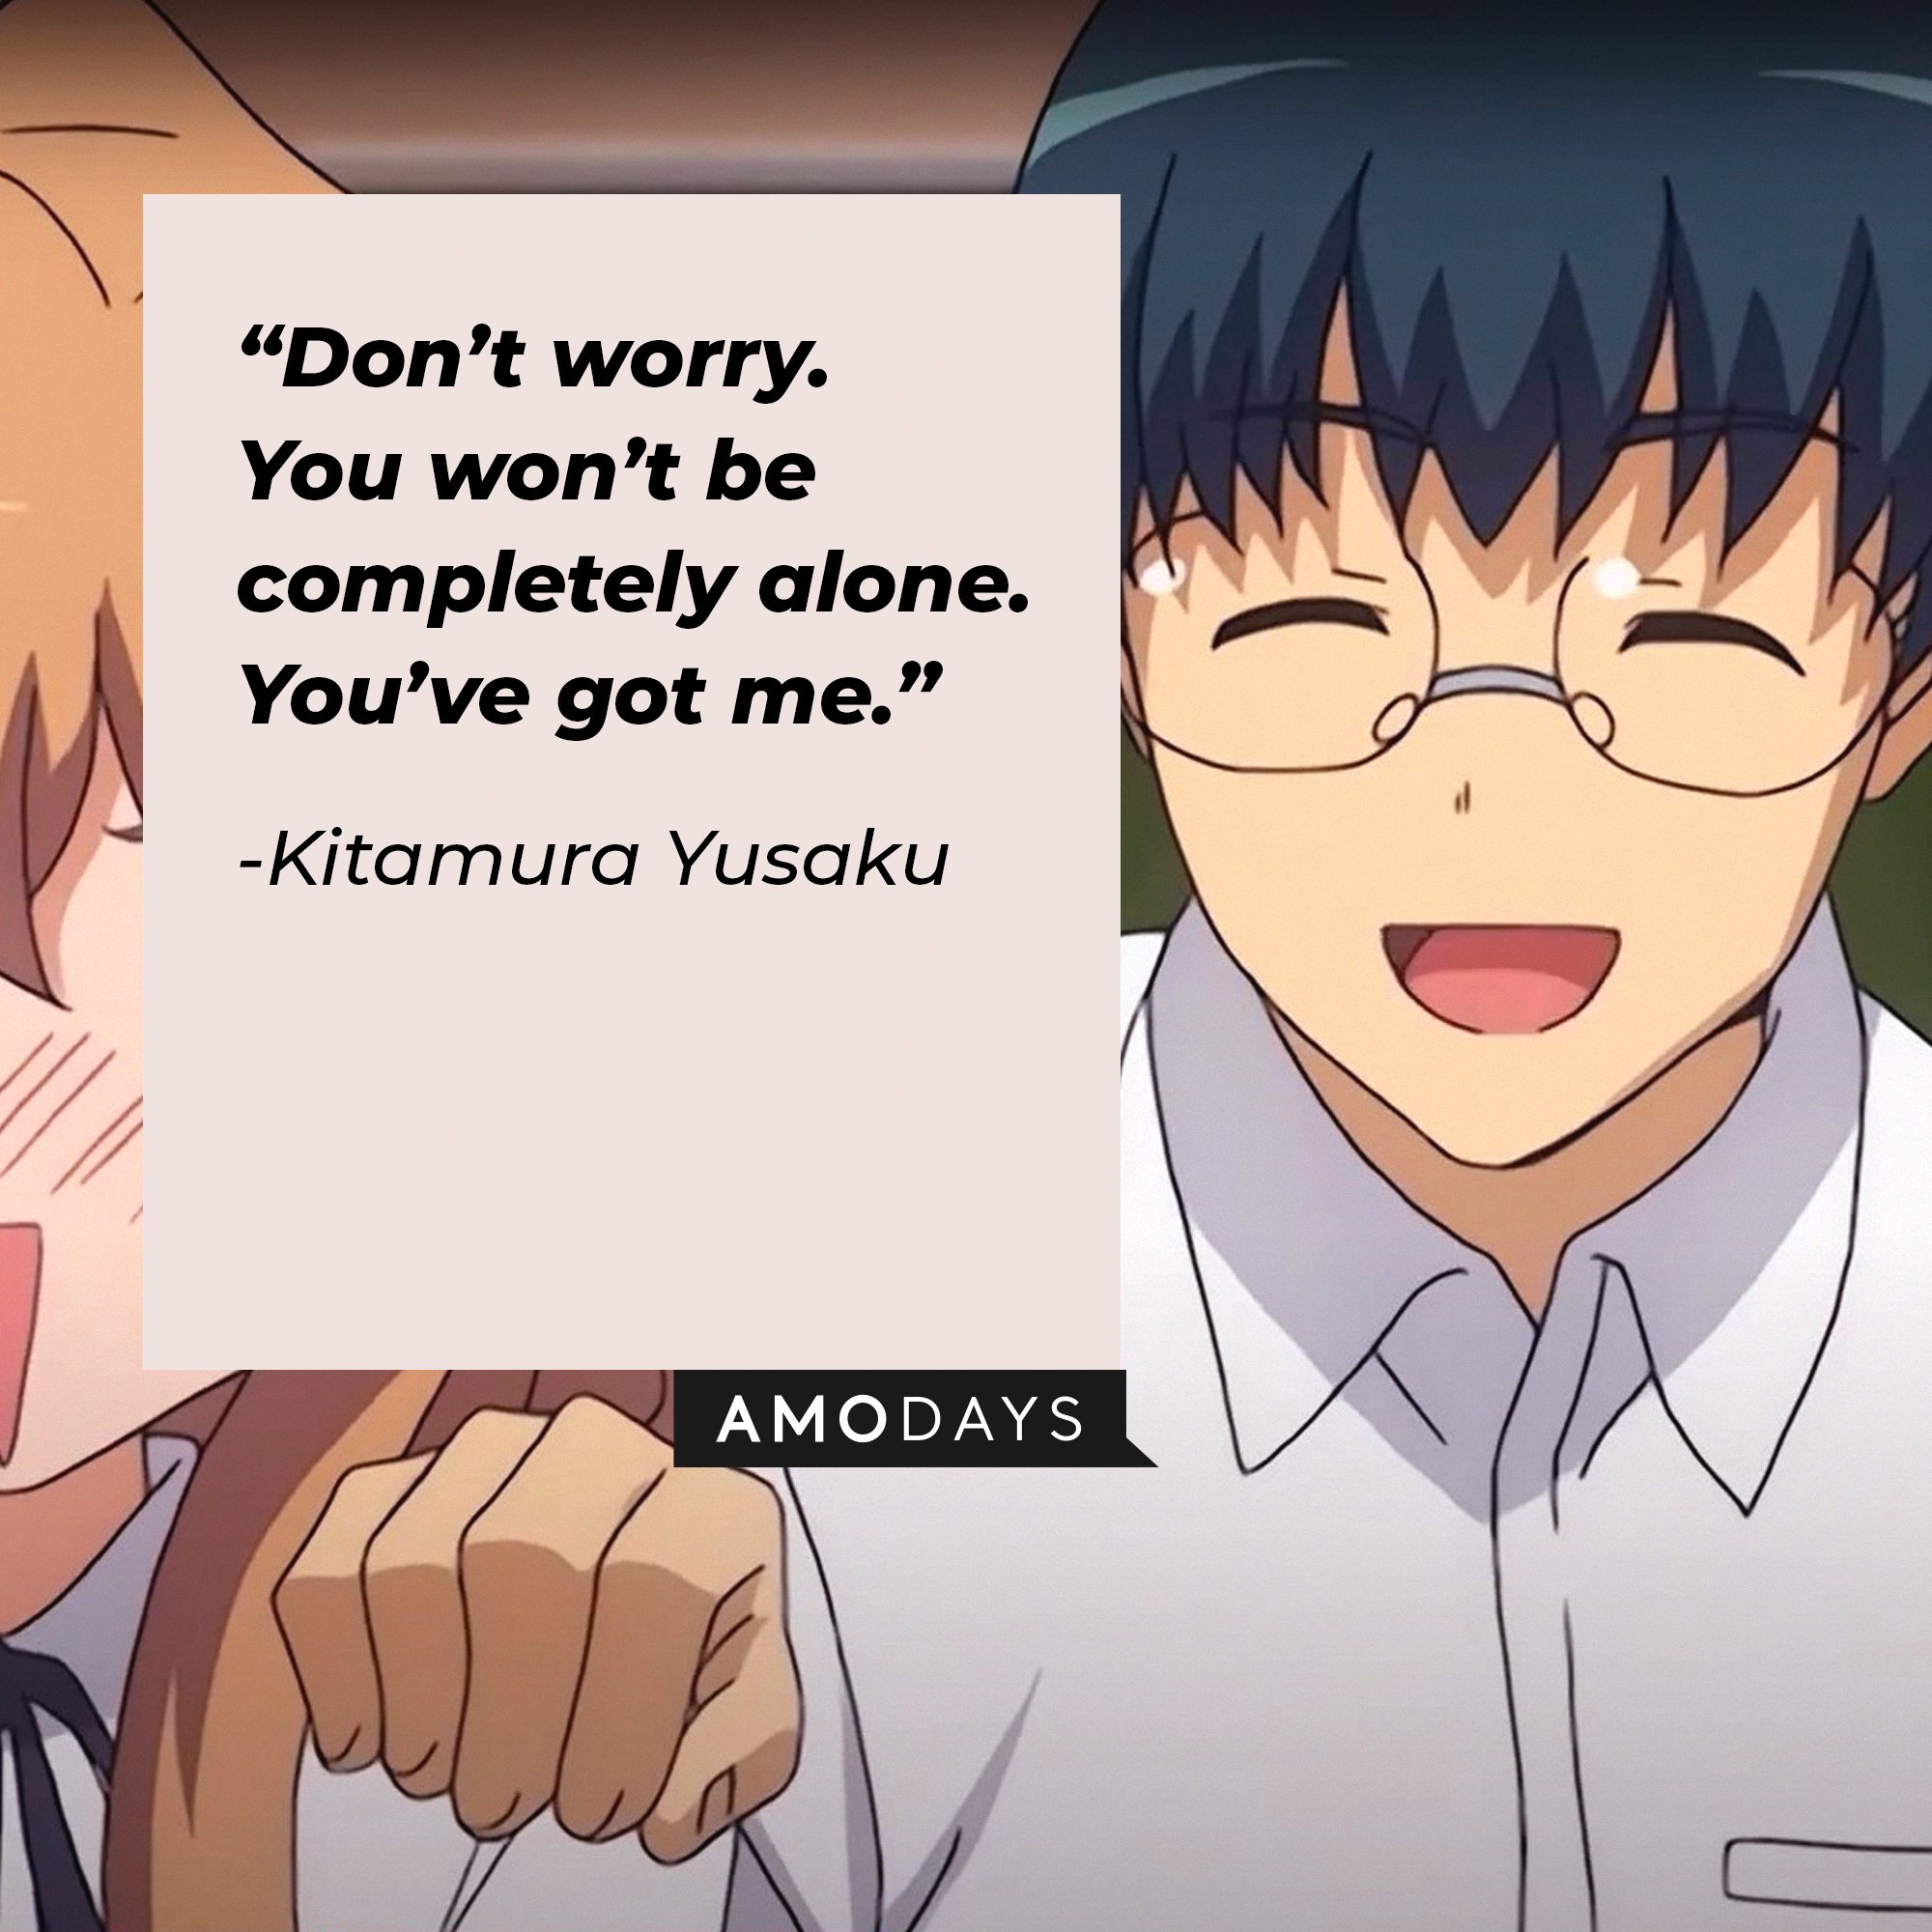 Kitamura Yusaku’s quote: “Don't worry. You won’t be completely alone. You’ve got me.” | Image: AmoDays